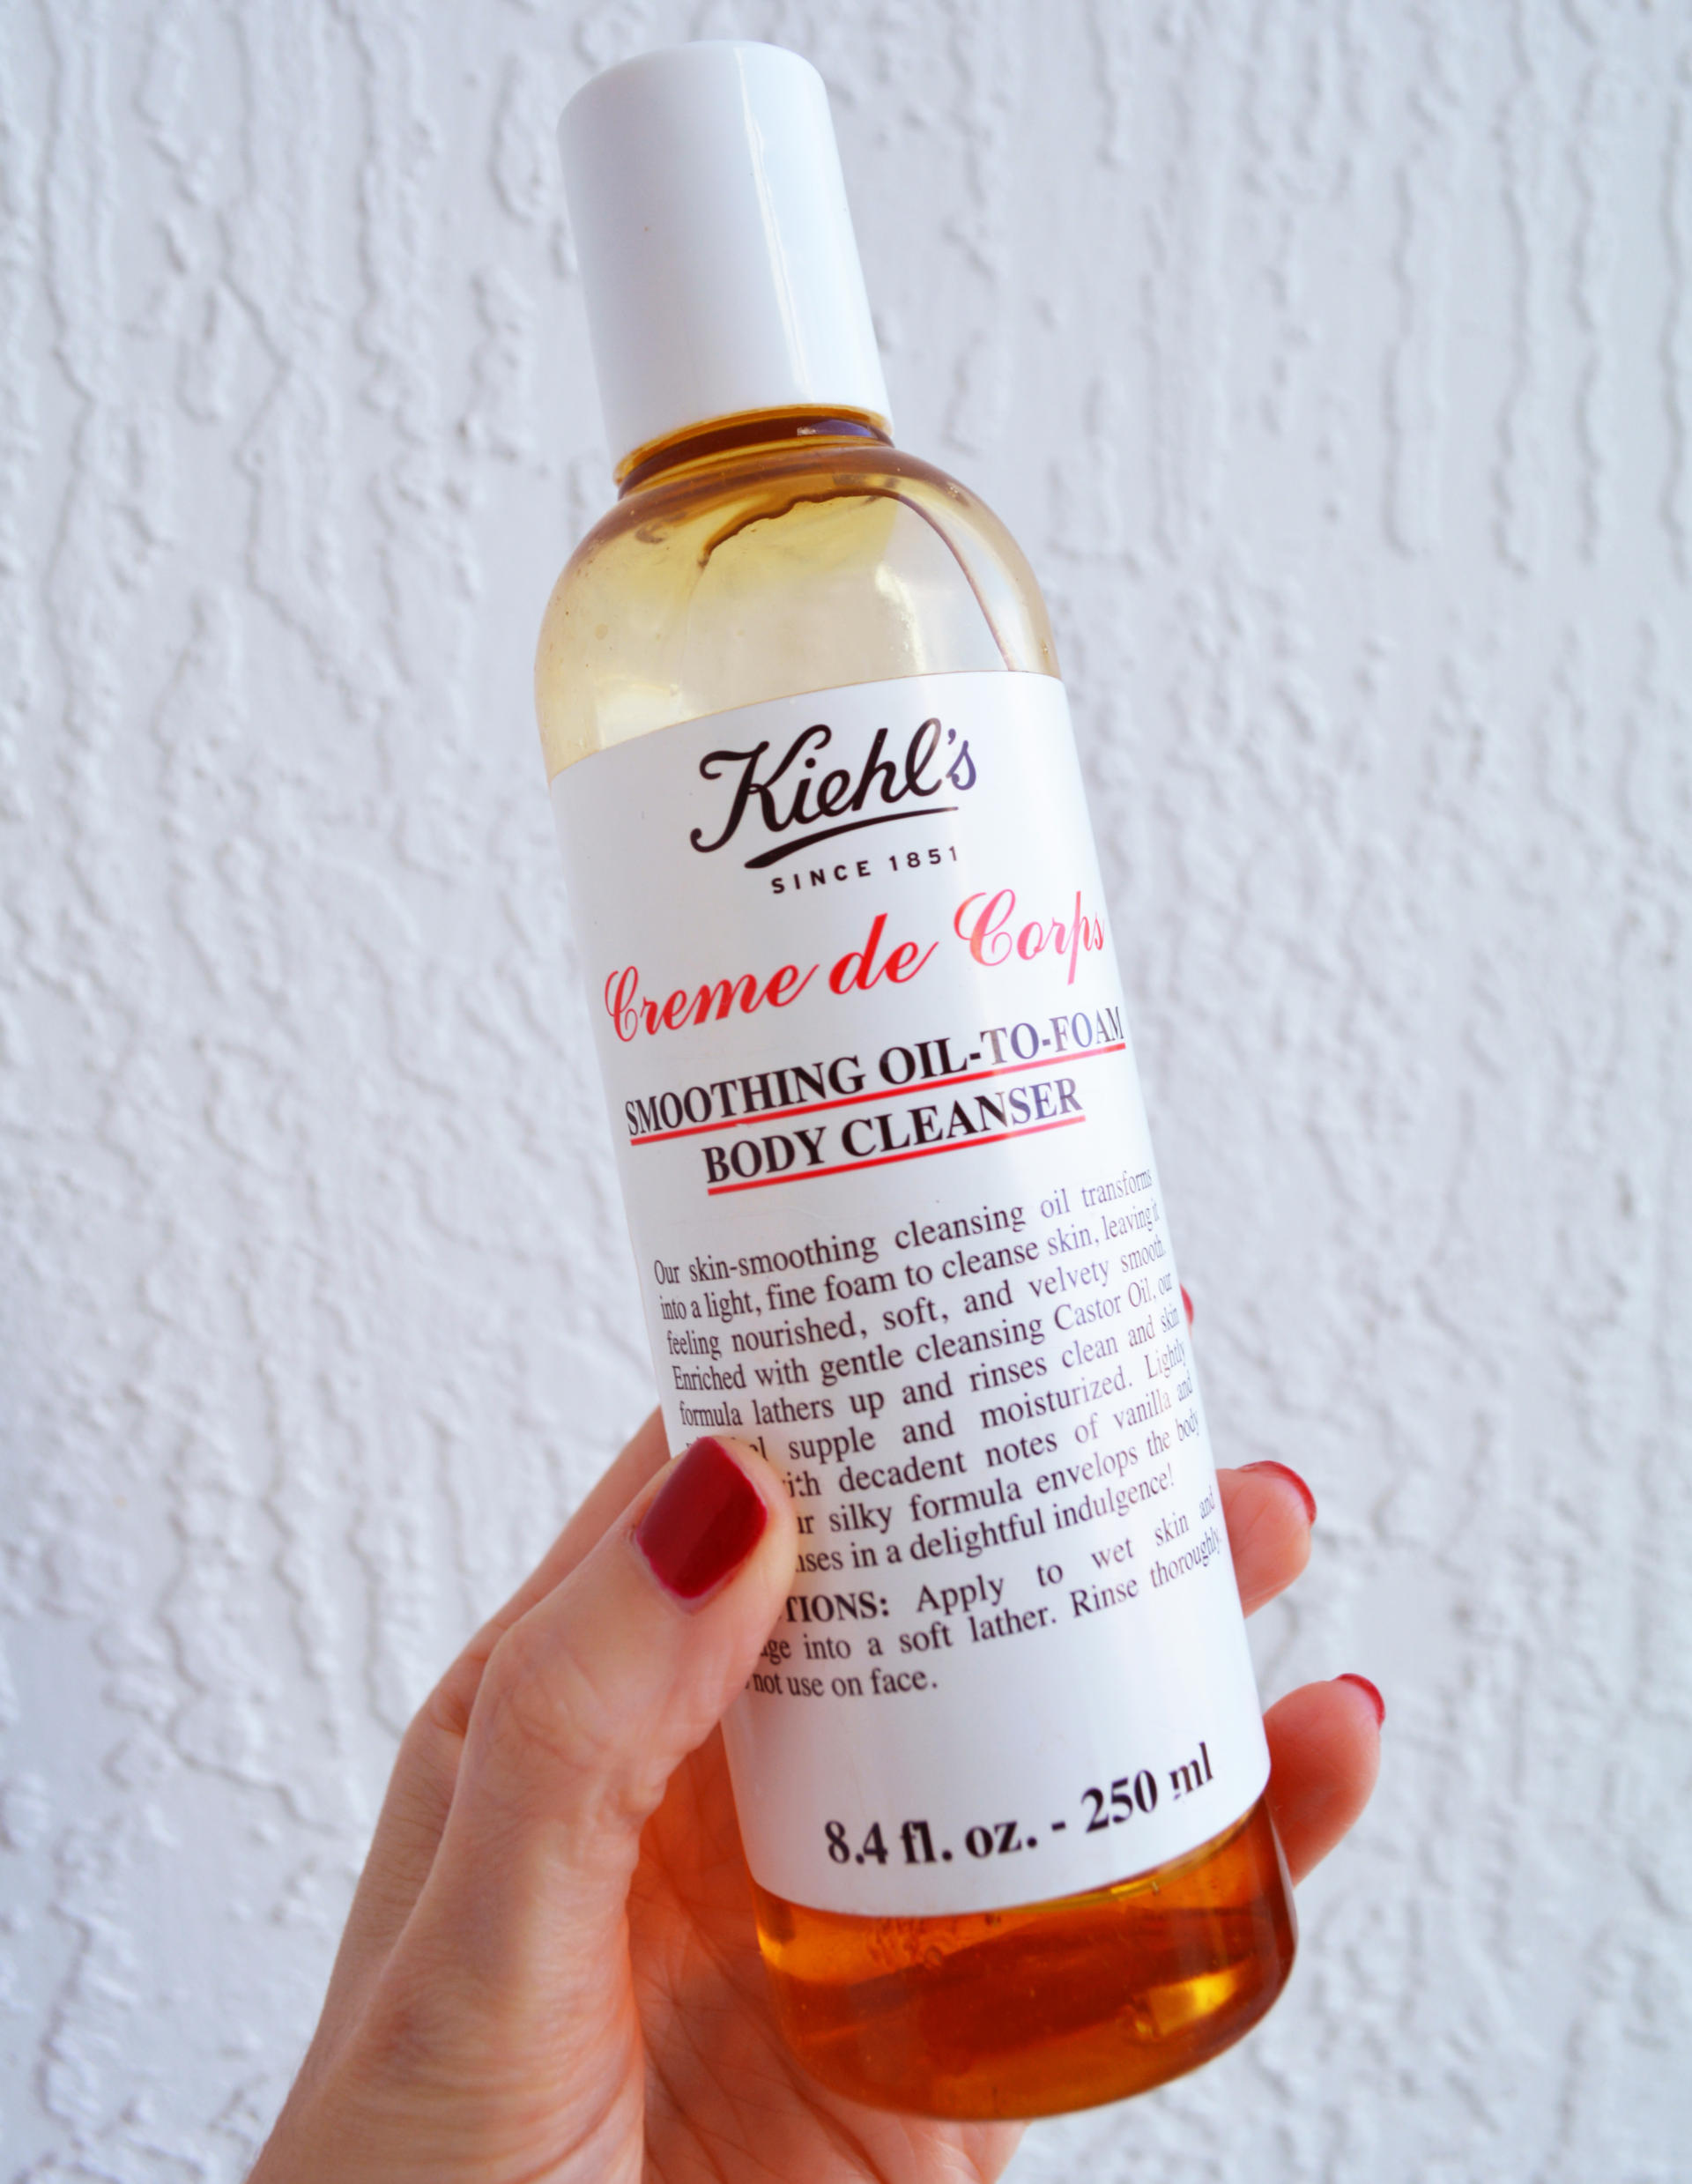 Kiehl's Creme de Corps Smoothing Oil-To-Foam Body Cleanser